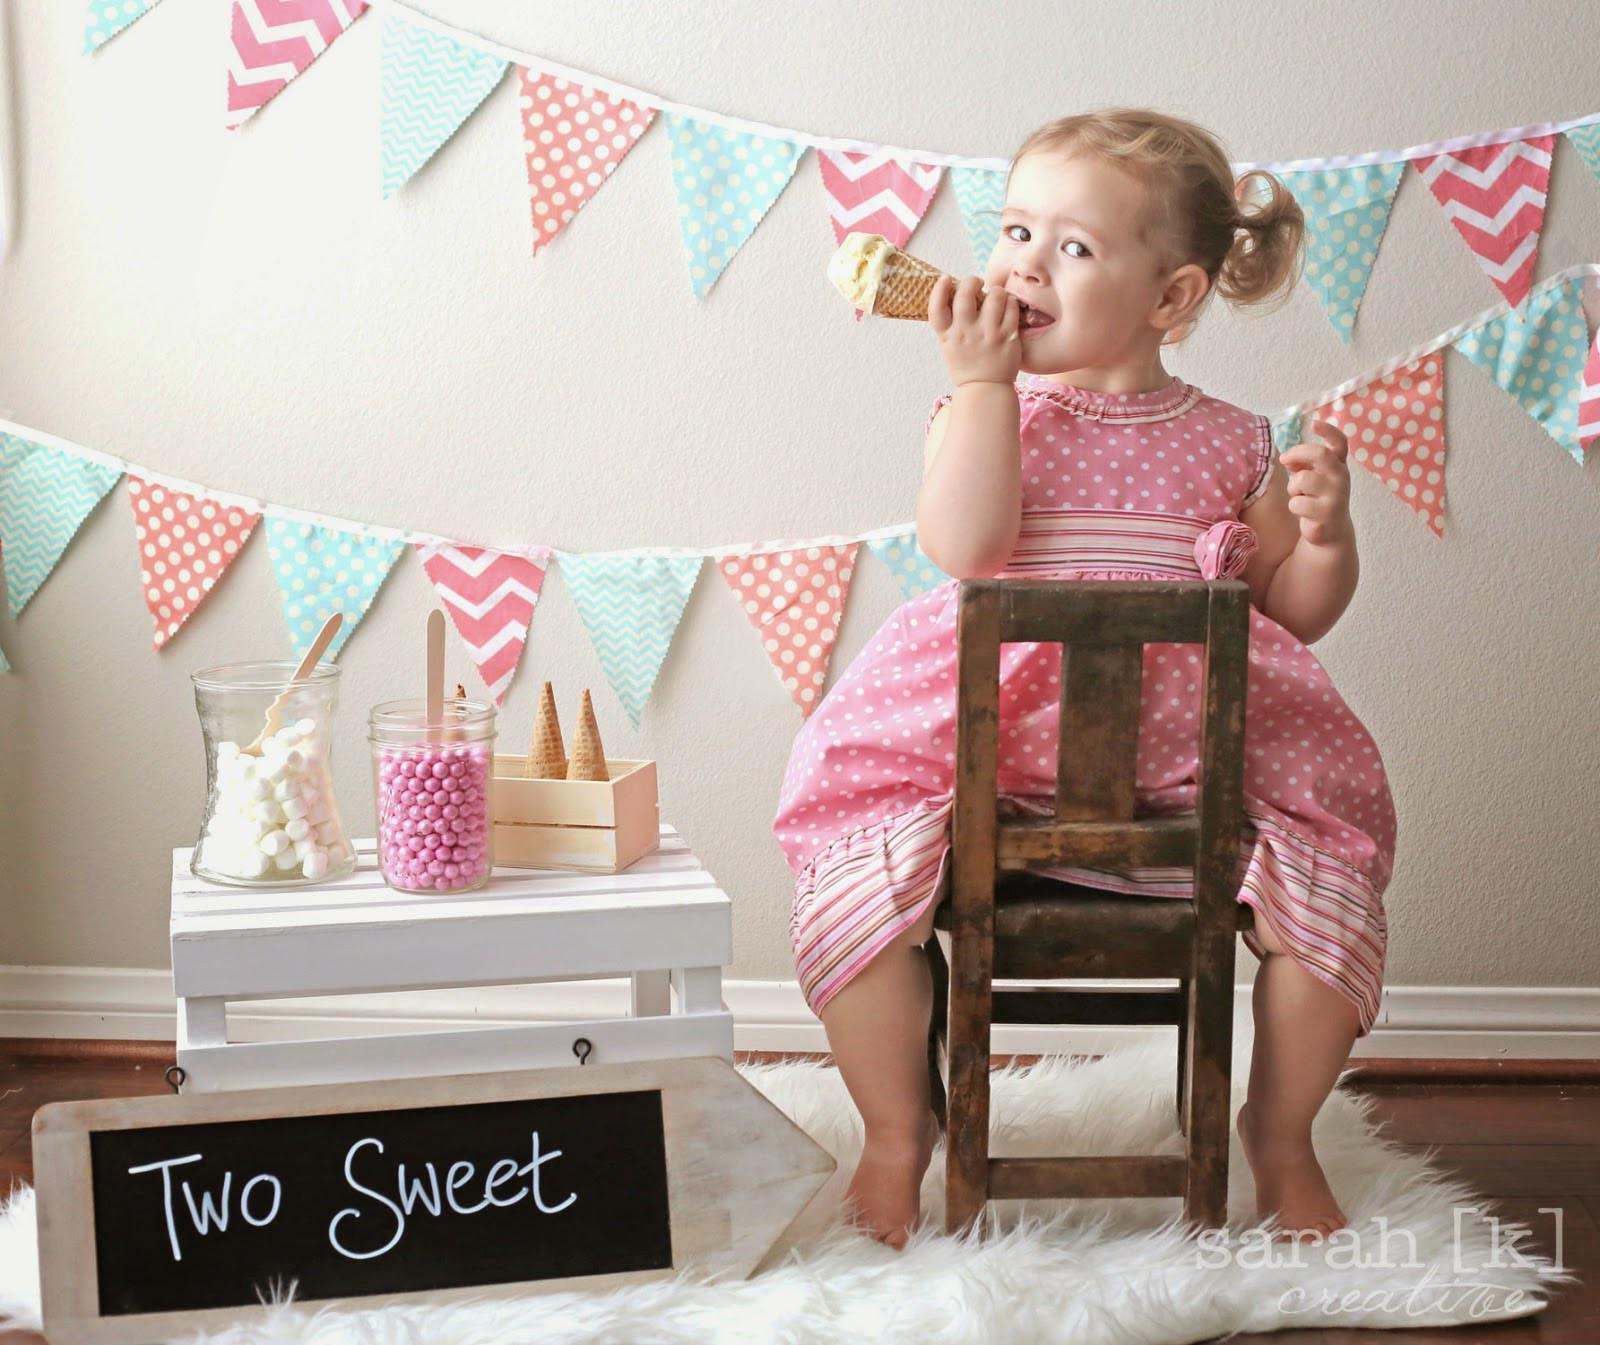 Birthday Party Ideas For 2 Year Girl
 Toddler Party Games 2 Year Olds